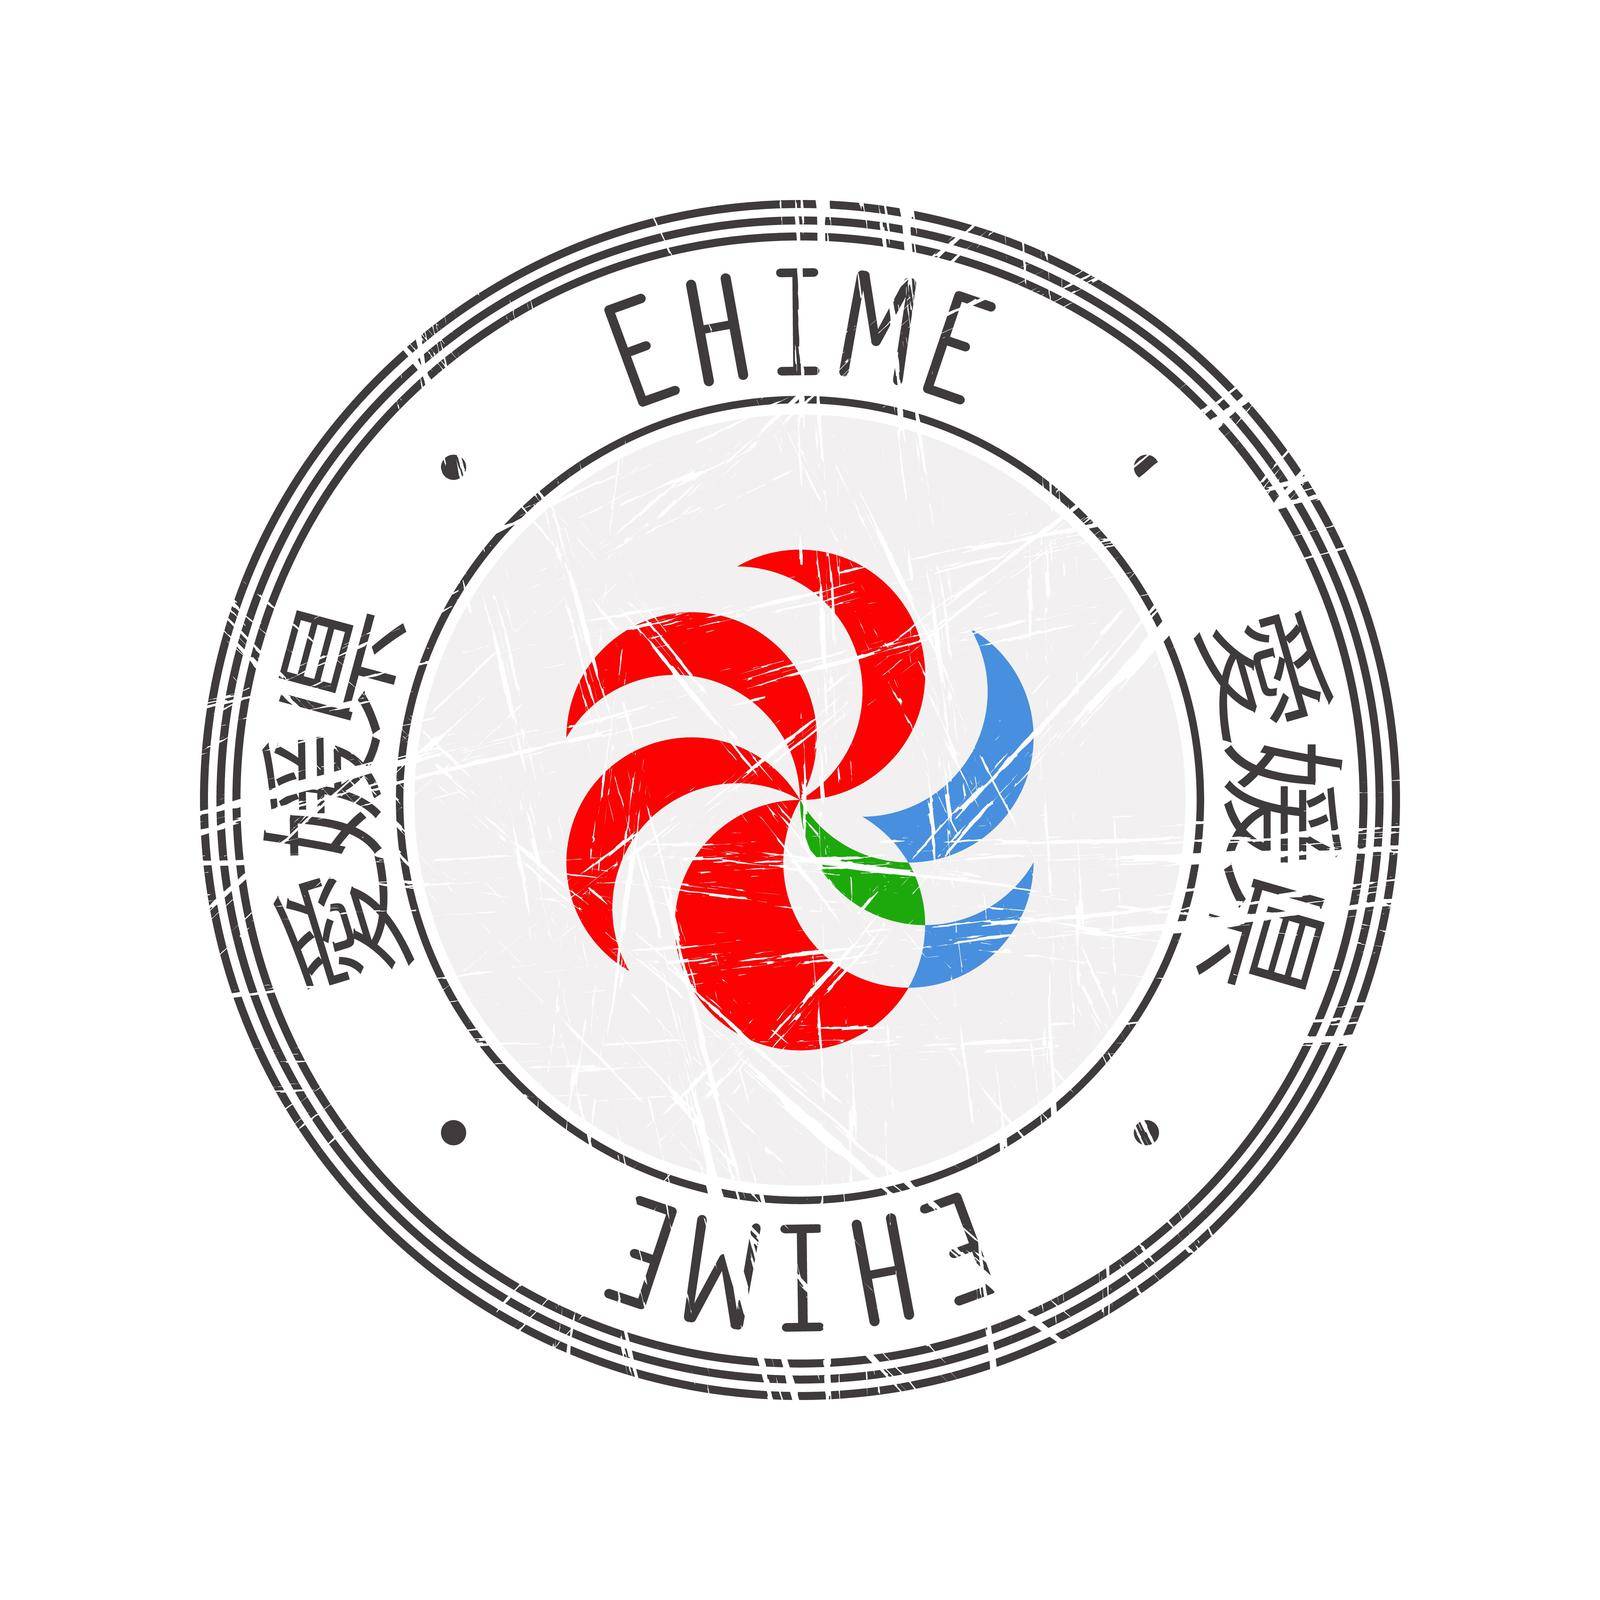 Ehime Prefecture rubber stamp by Lirch